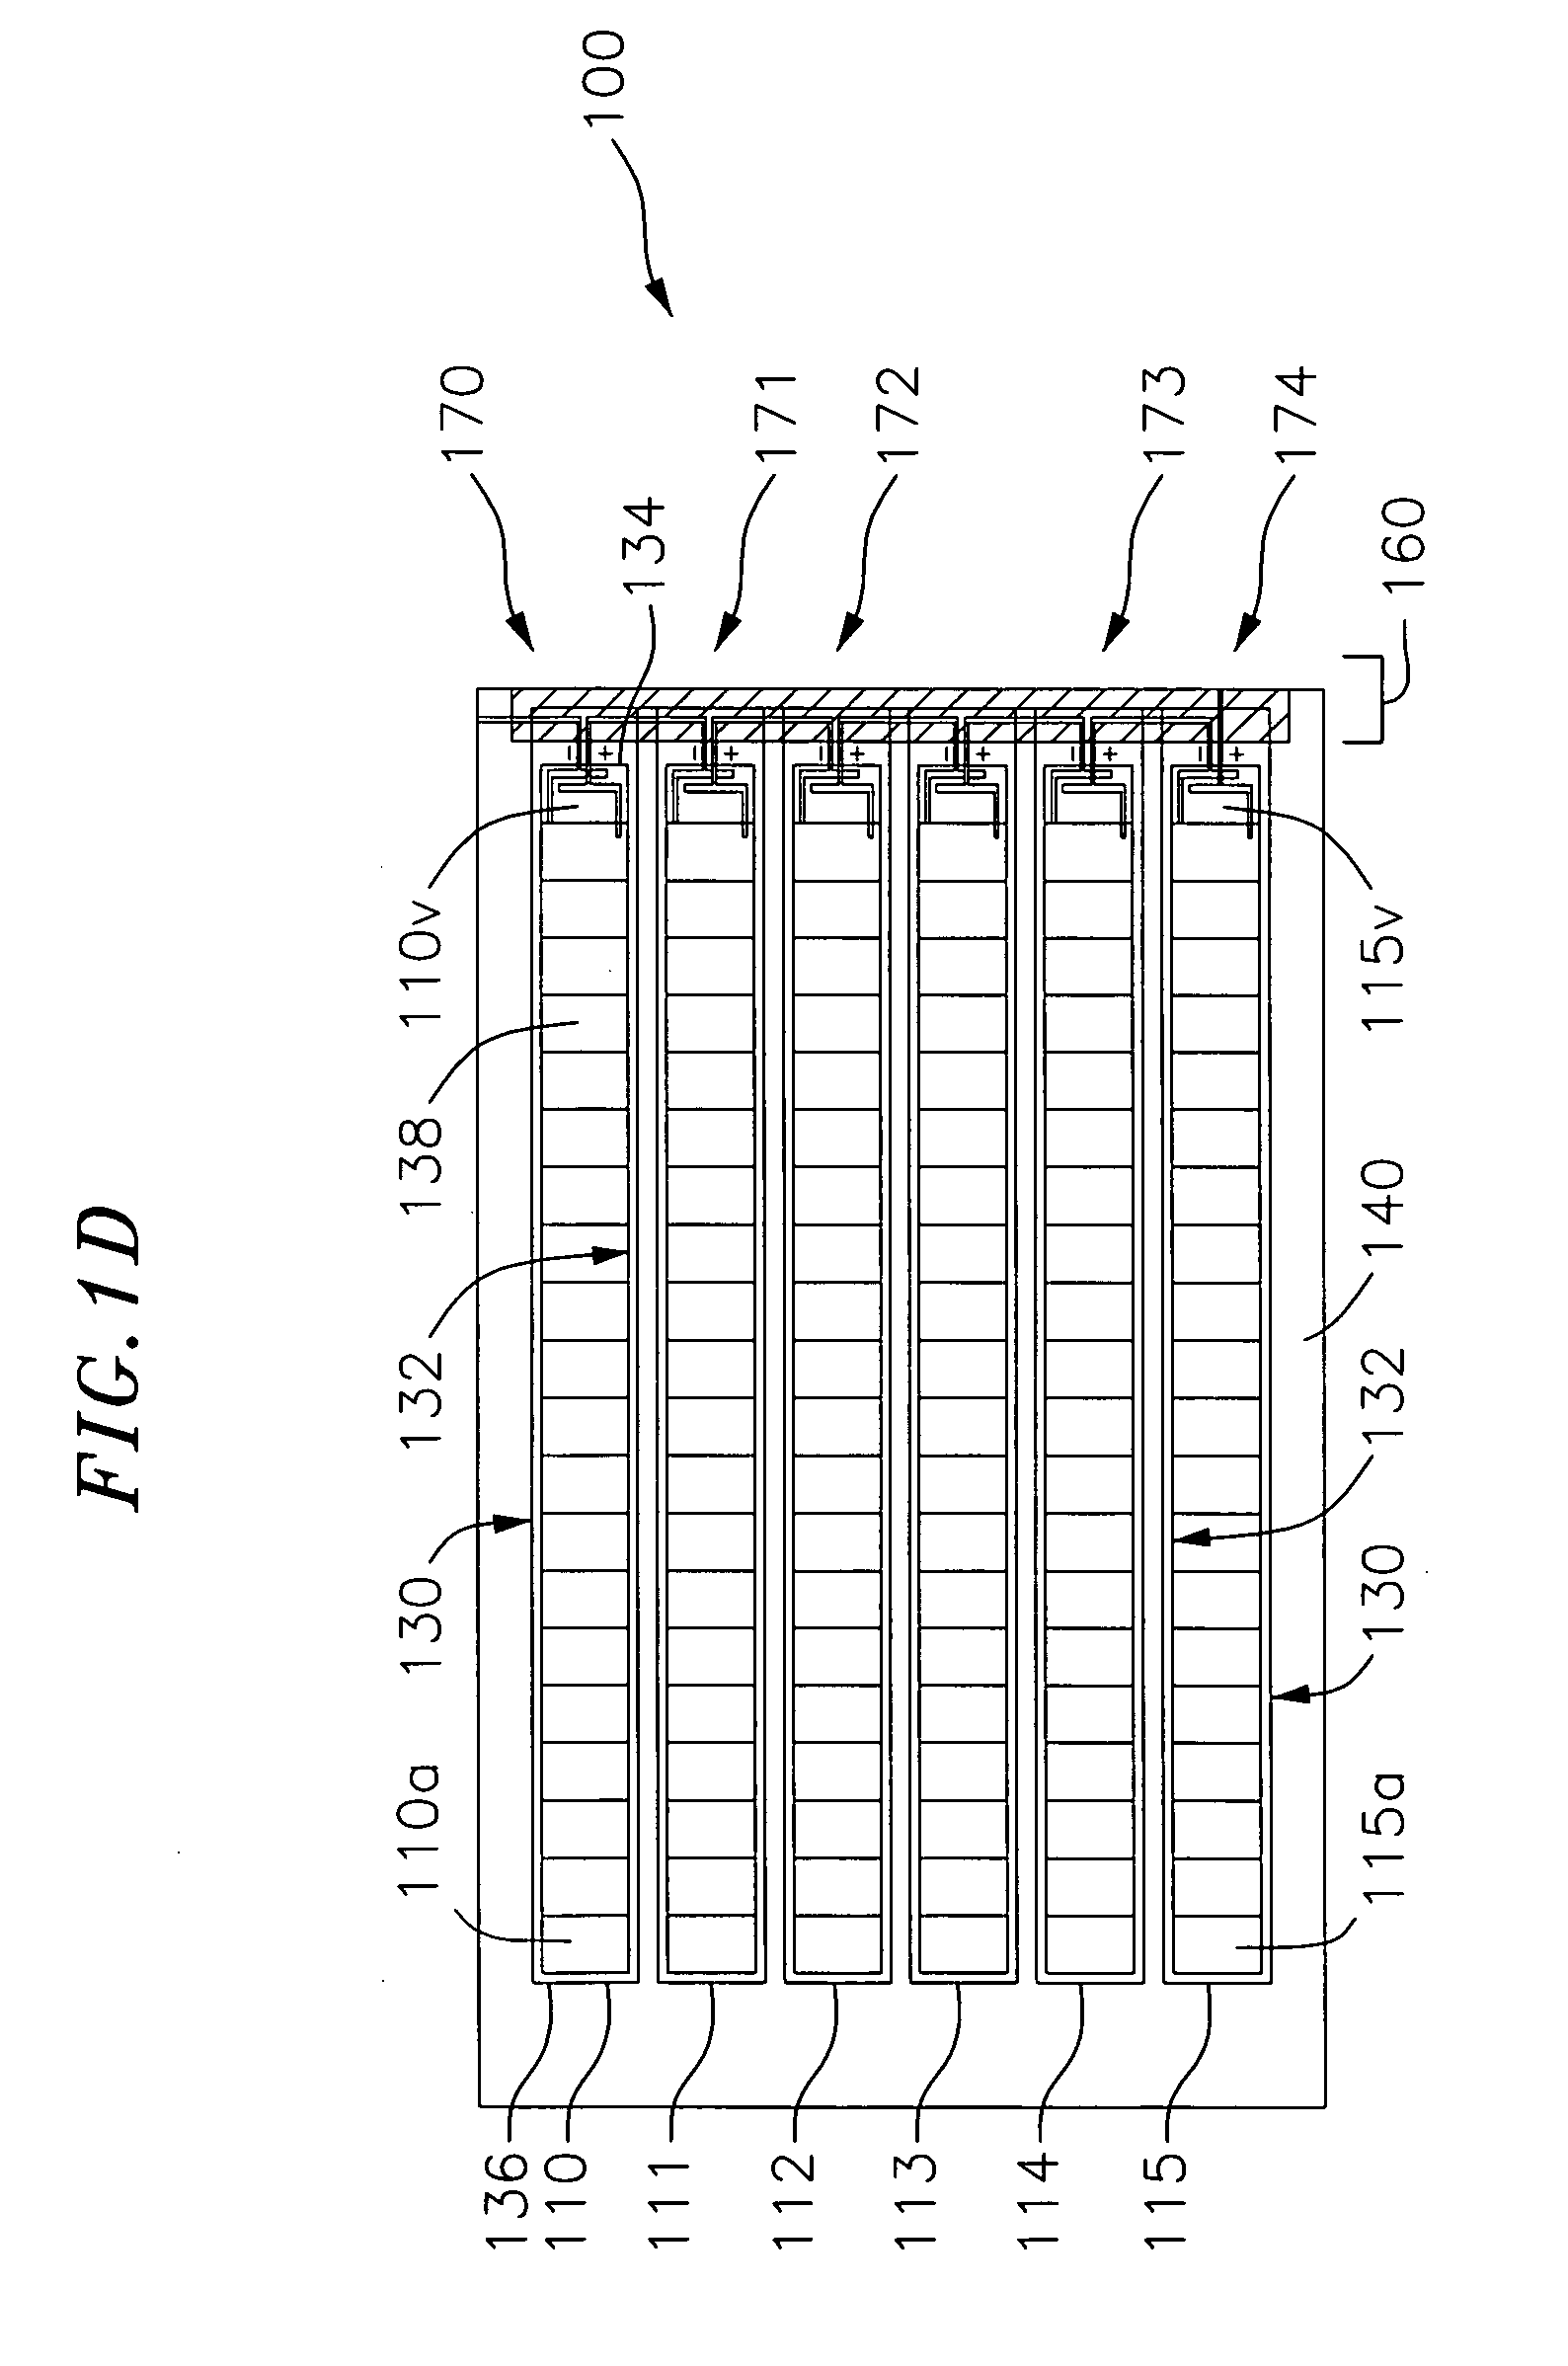 Integrated photovoltaic roofing component and panel